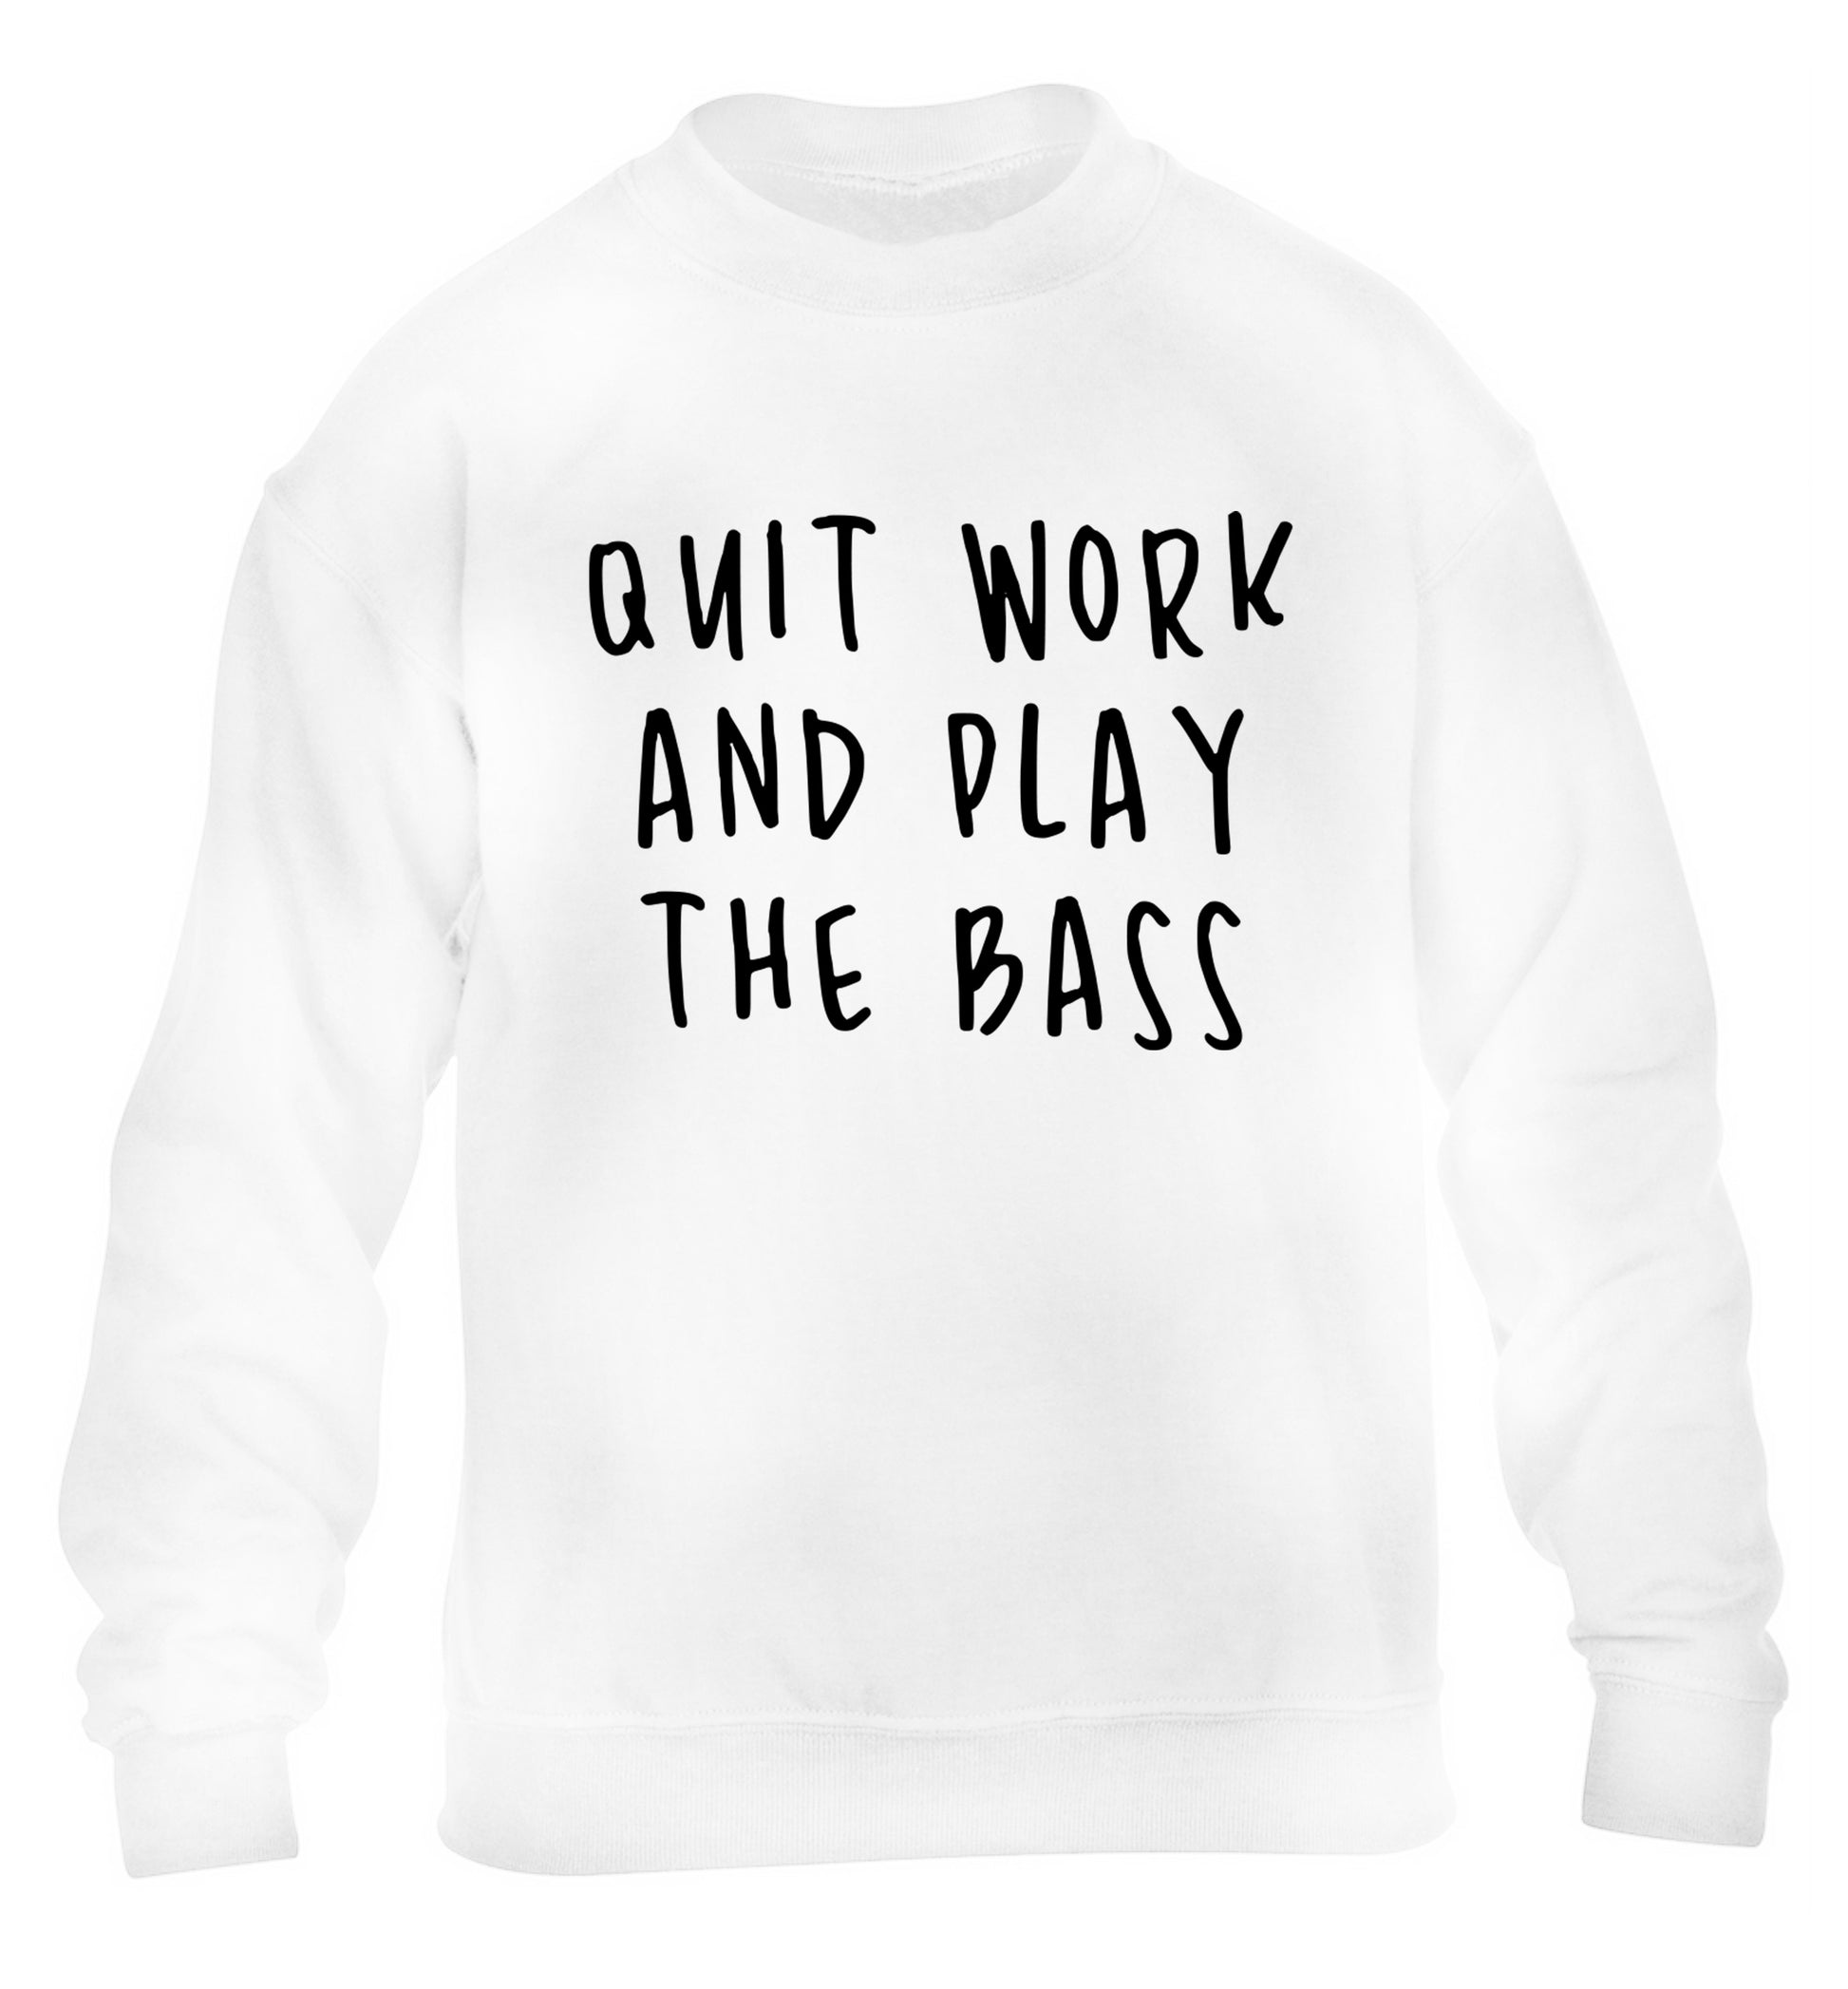 Quit work and play the bass children's white sweater 12-14 Years